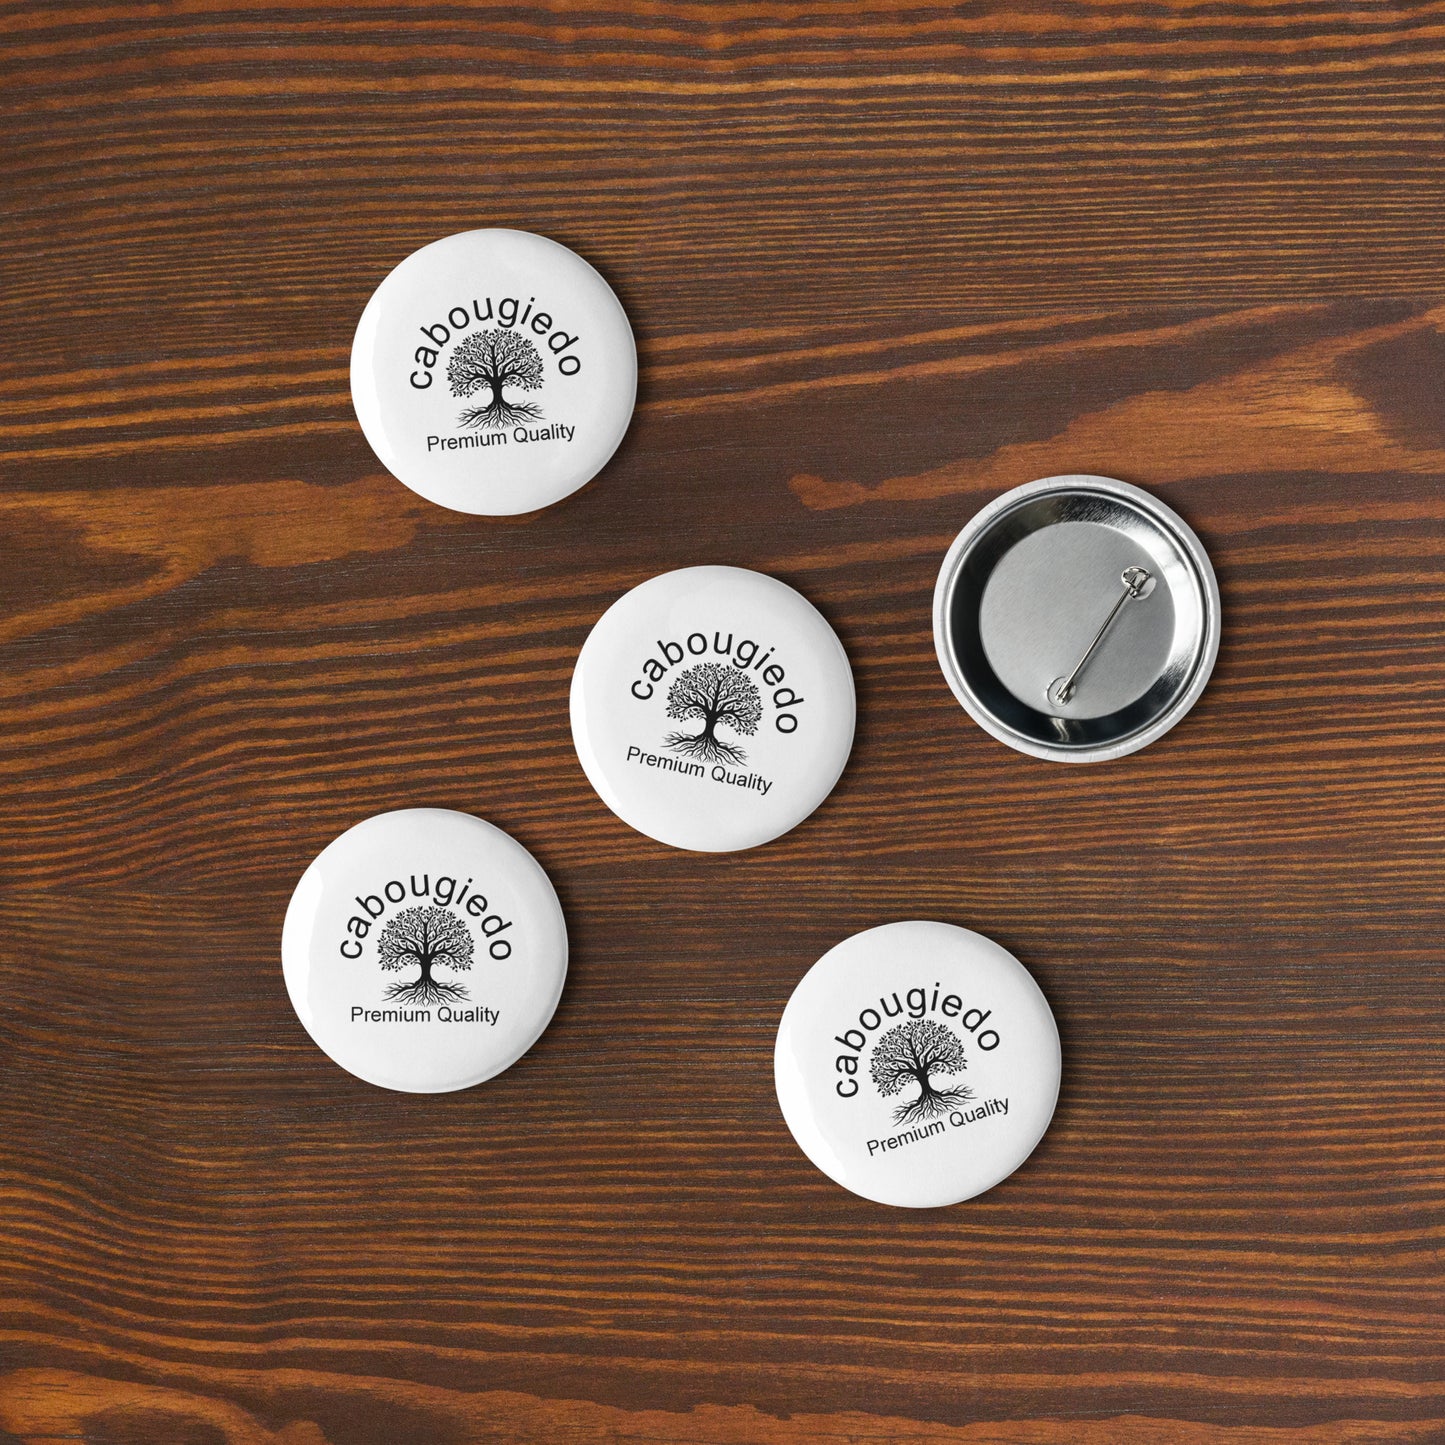 Set of 5 pin buttons - CaBougieDo Premium Quality